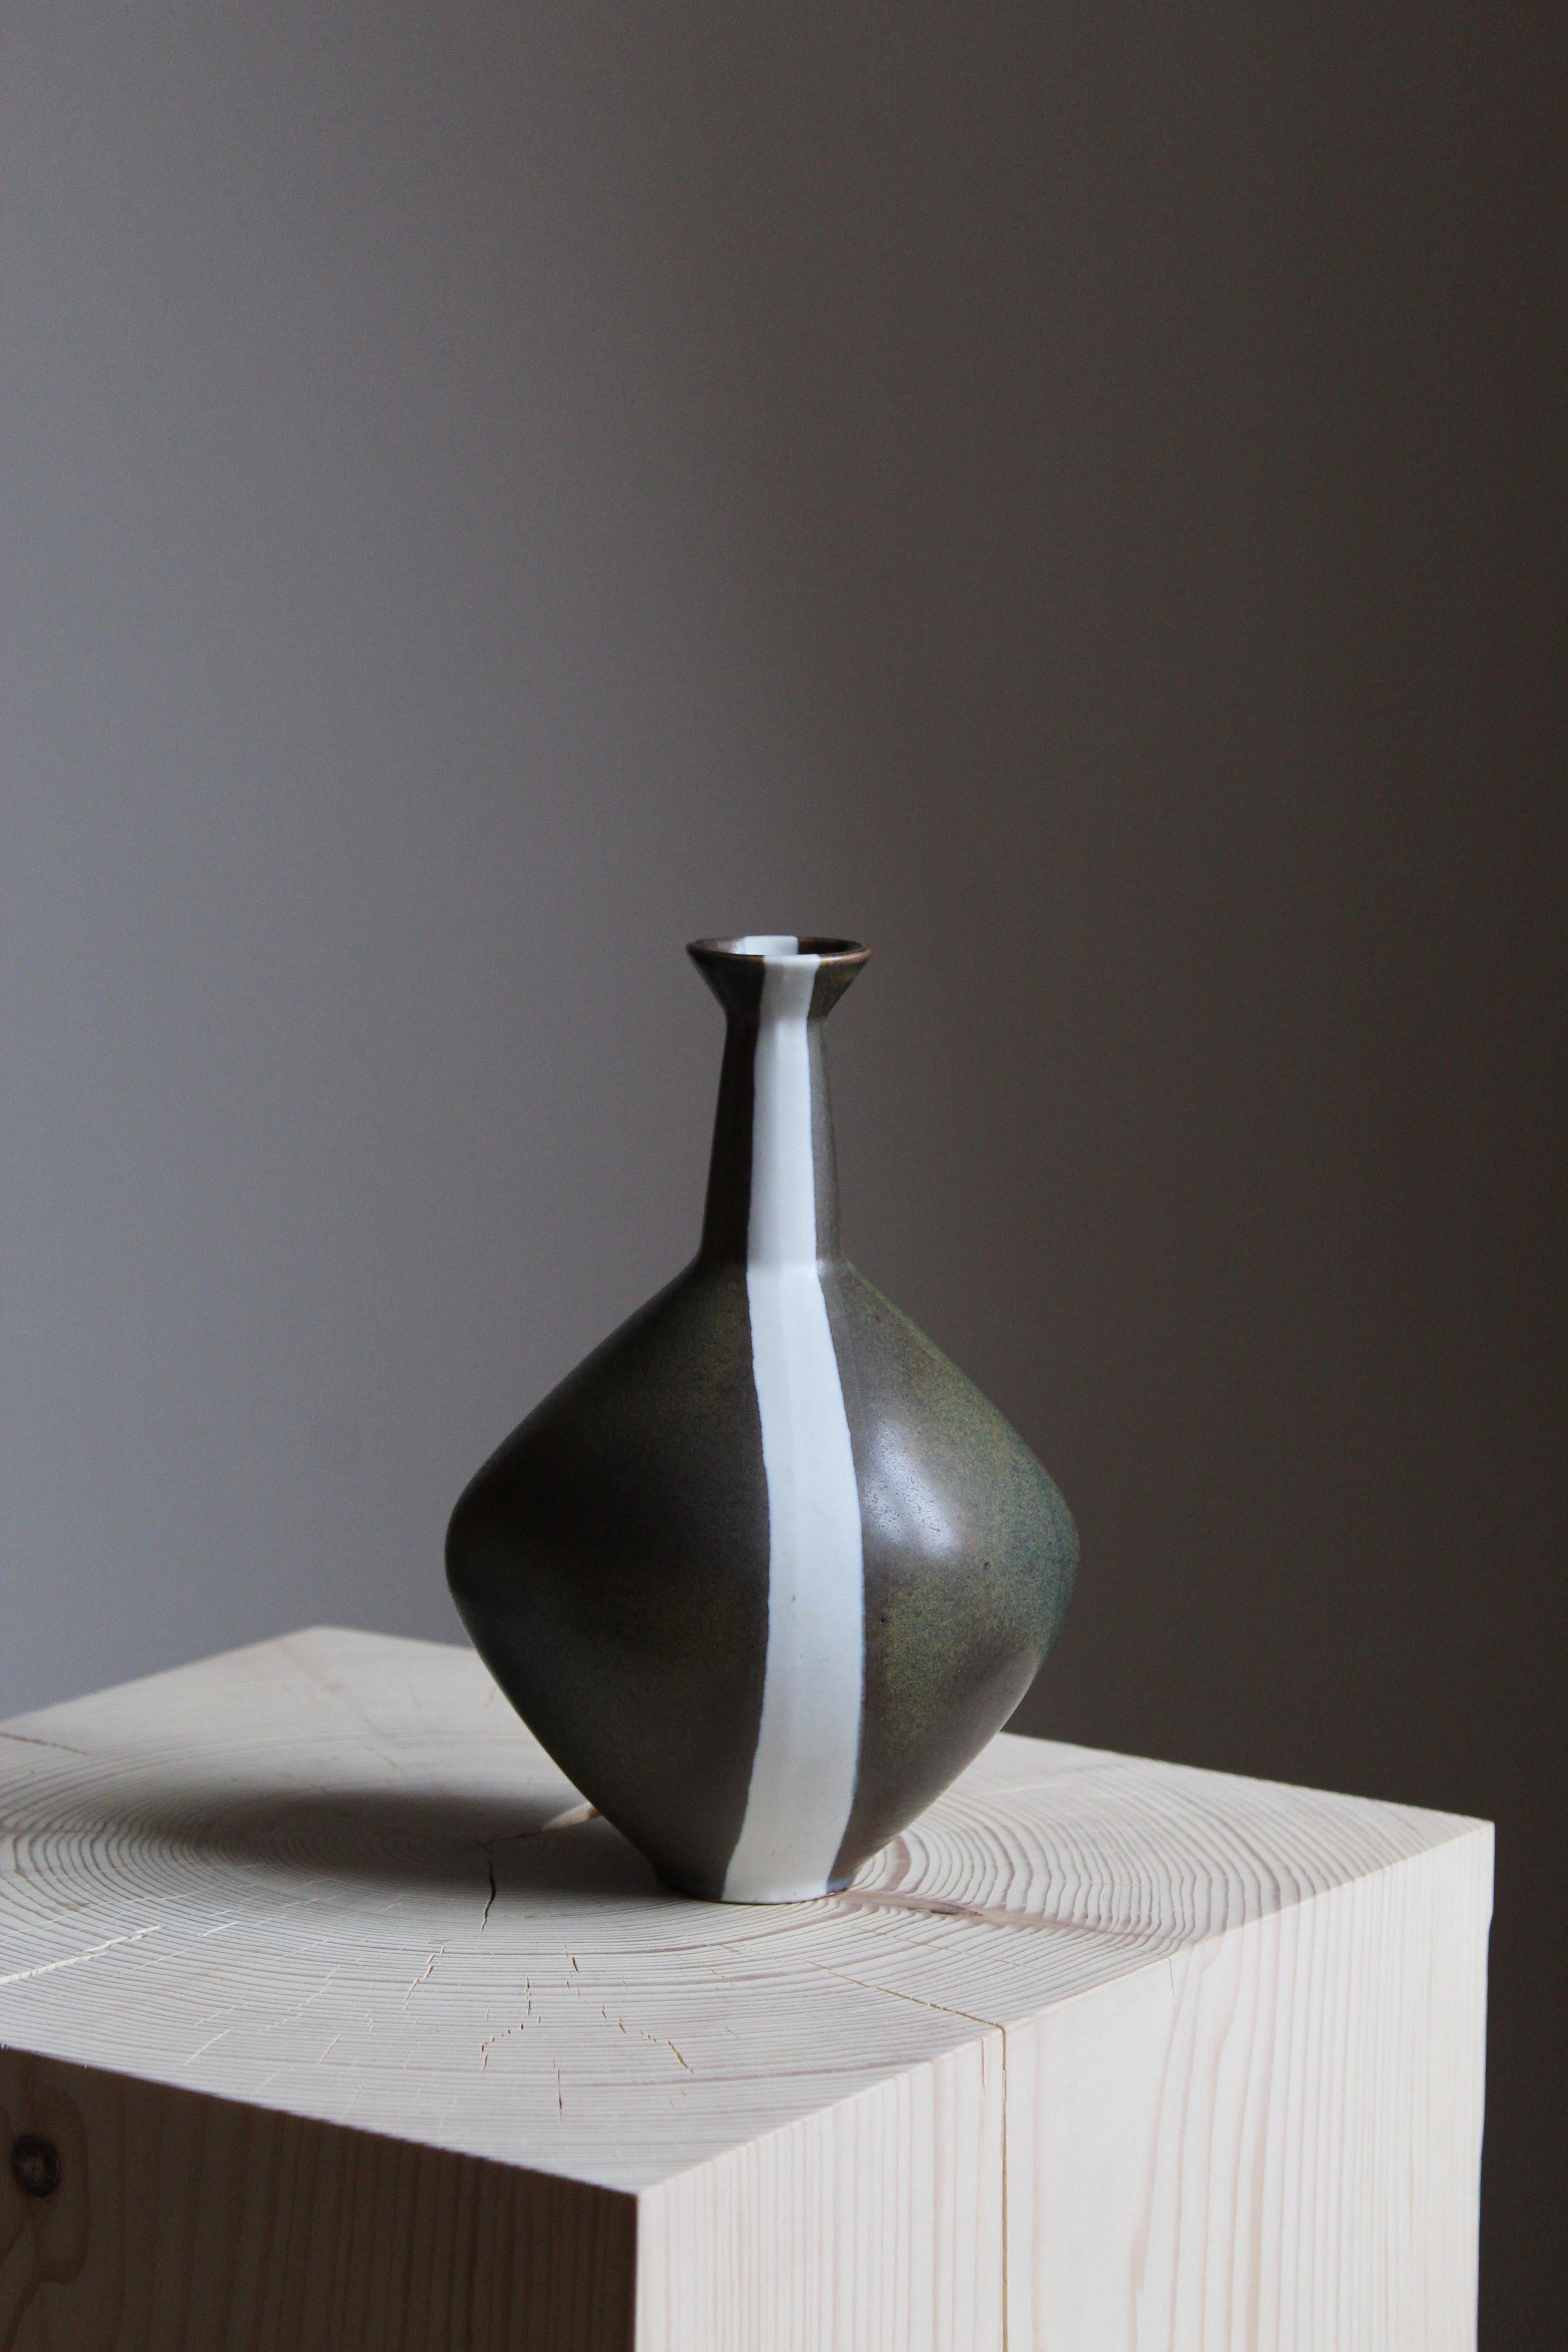 An organically shaped stoneware vase by Gabi Citron Tengborg for the iconic Swedish firm Gustavsberg. 

Other ceramicists of the period include Berndt Friberg, Axel Salto, Carl-Harry Stålhane and Wilhelm Kåge.